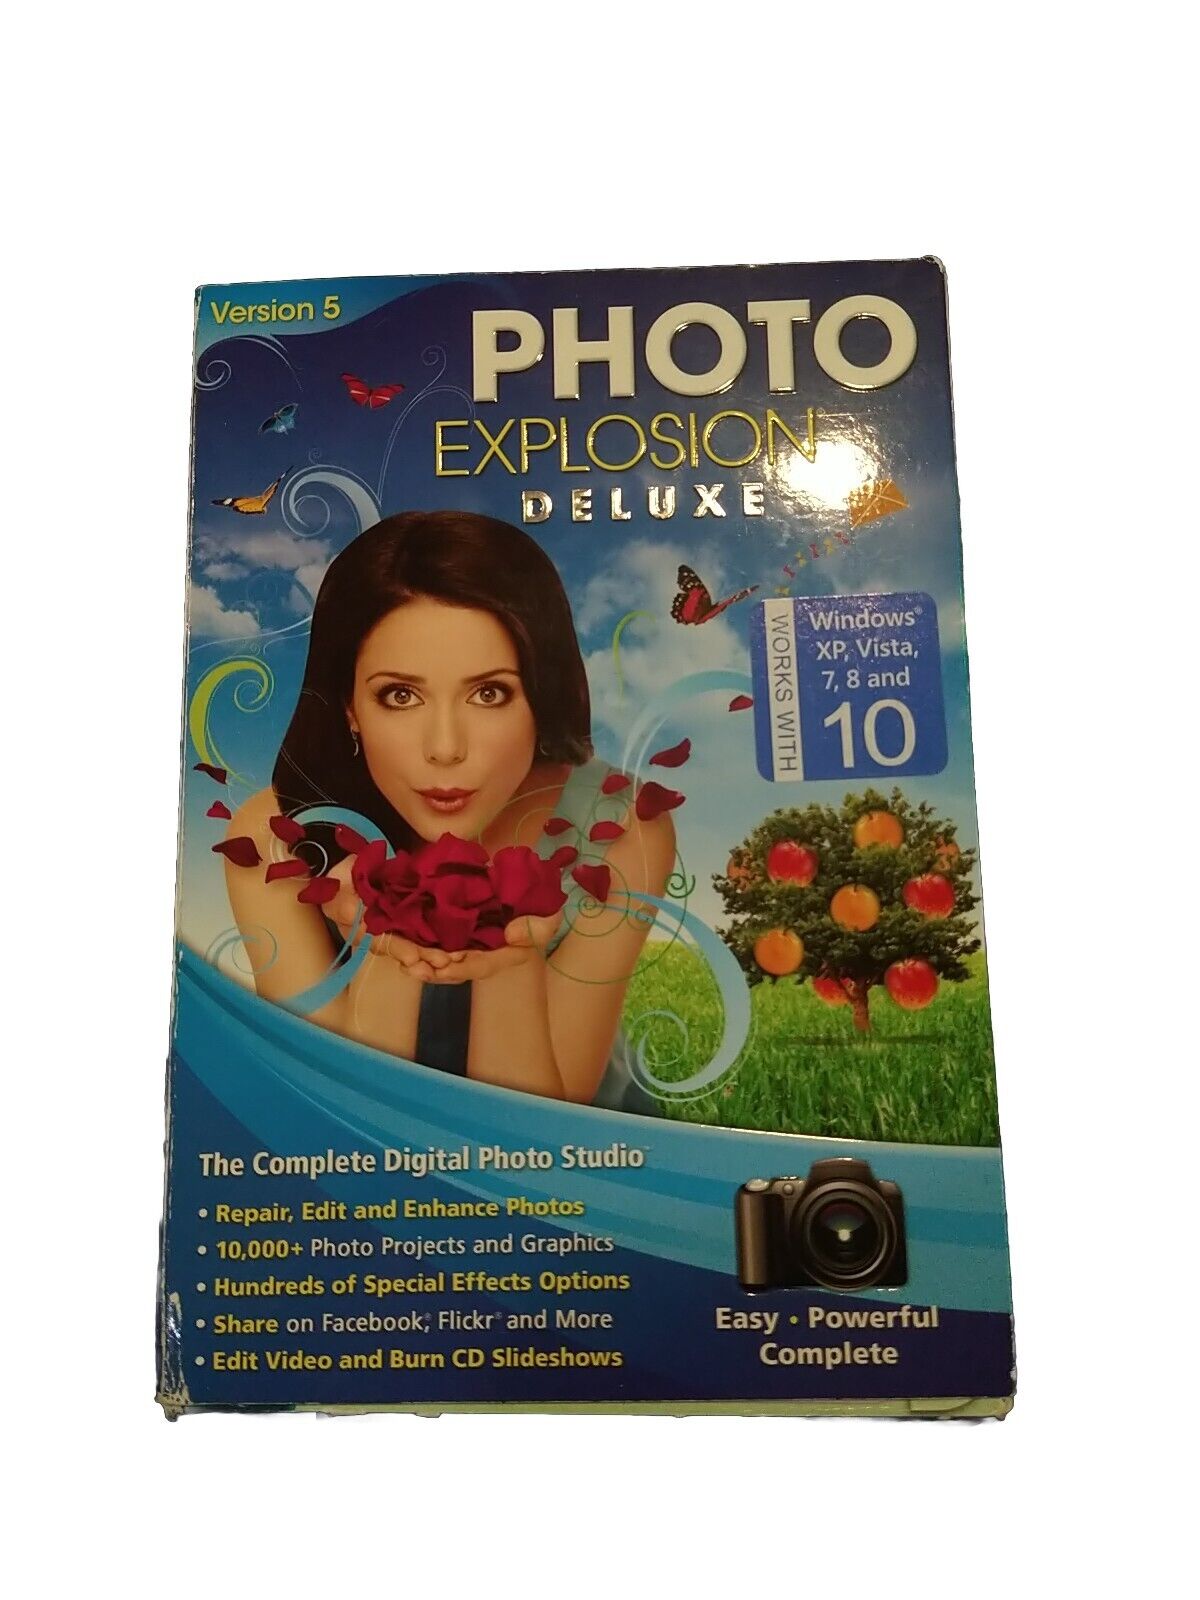 PHOTO EXPLOSION Deluxe V5 Windows 7 8 10 Digital Photo Editing PC Software